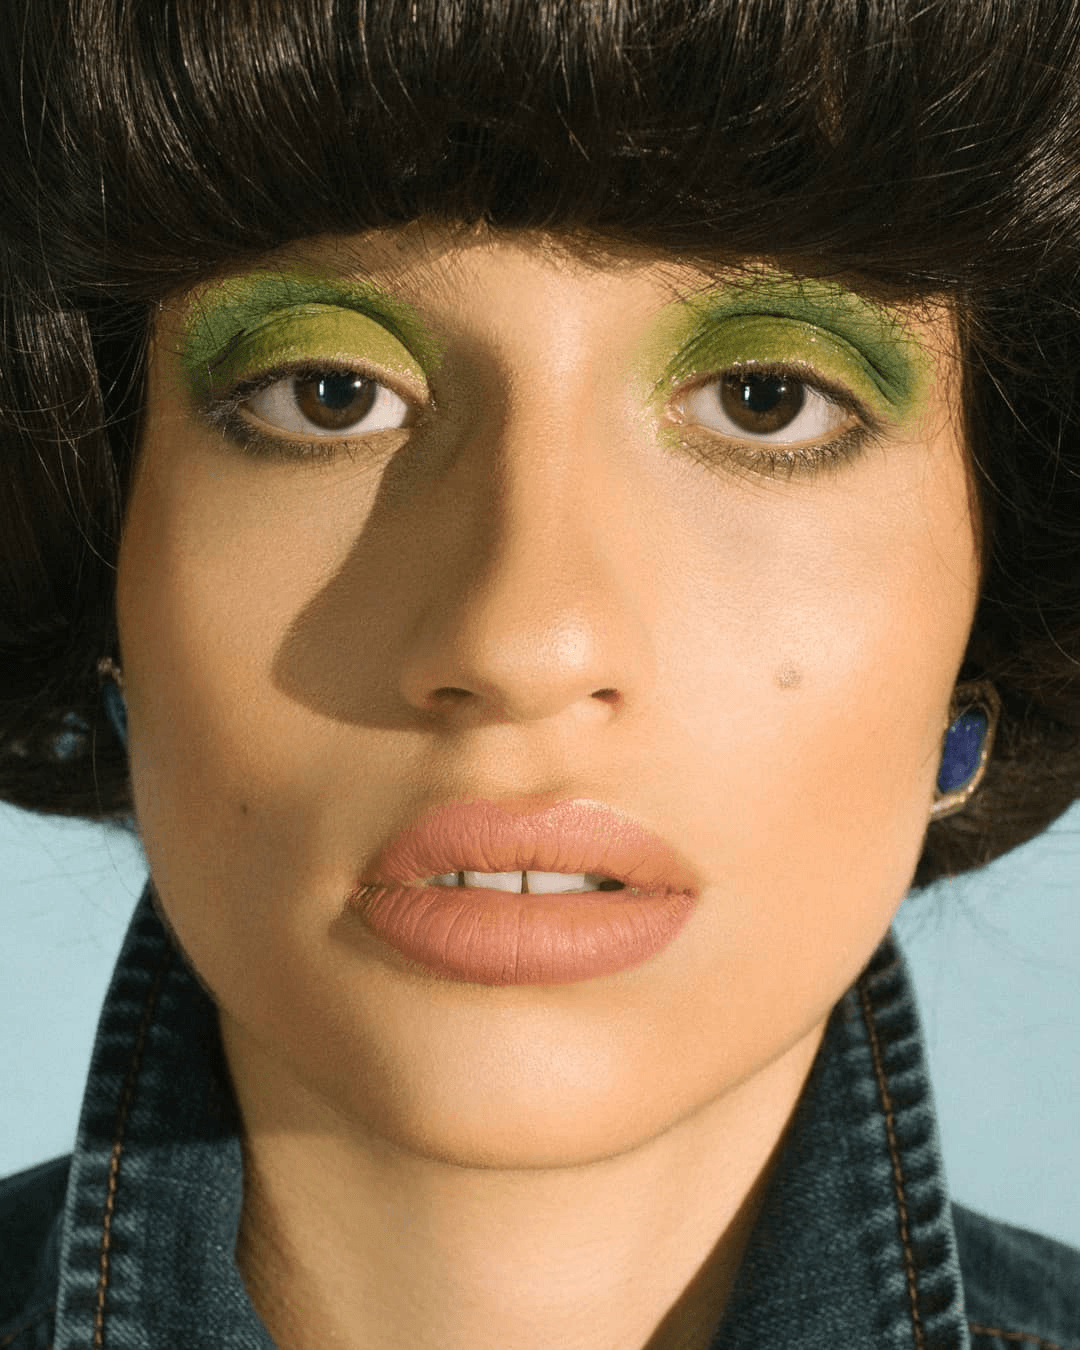 A close-up of a woman's face with vibrant green eyeshadow, capturing a vintage look with modern makeup artistry.